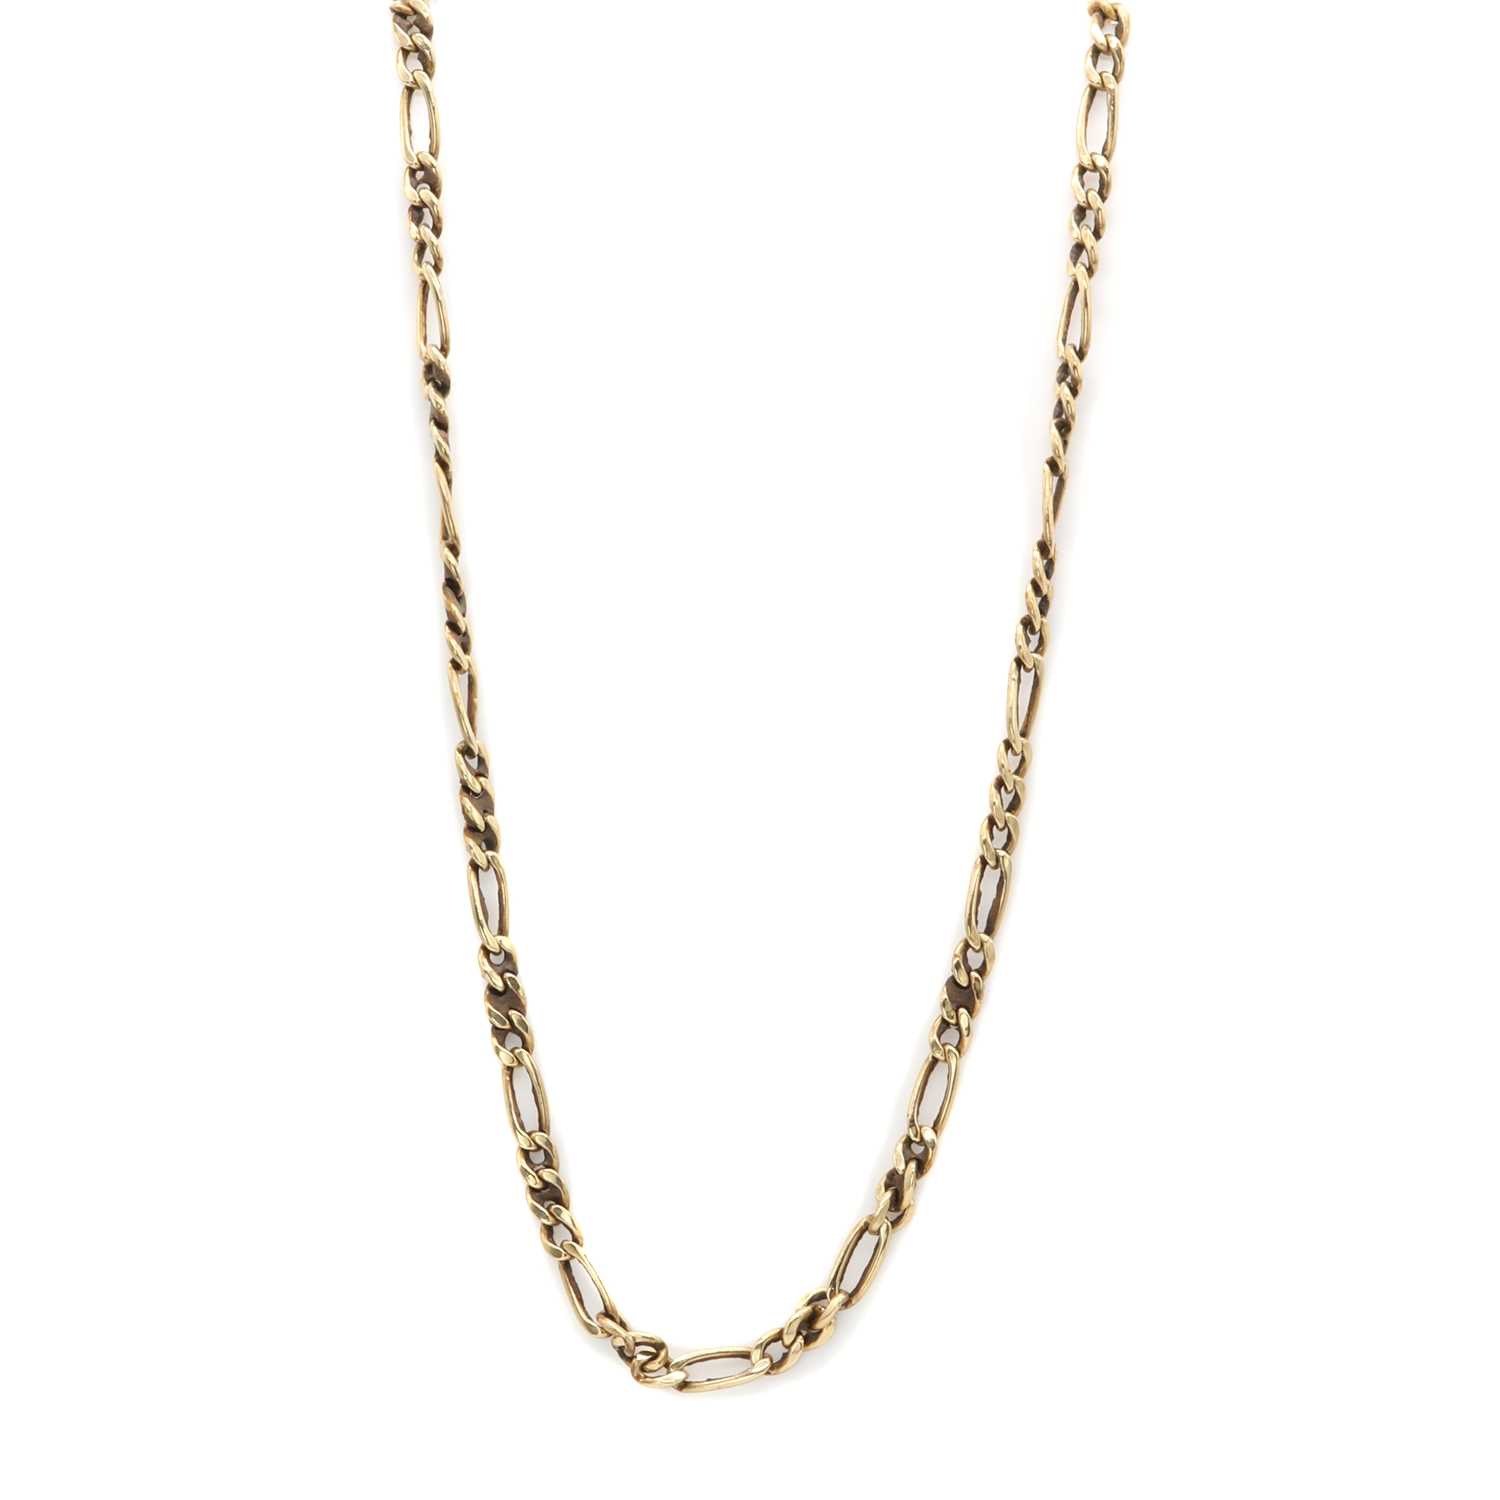 Lot 288 - A 9ct gold figaro link chain